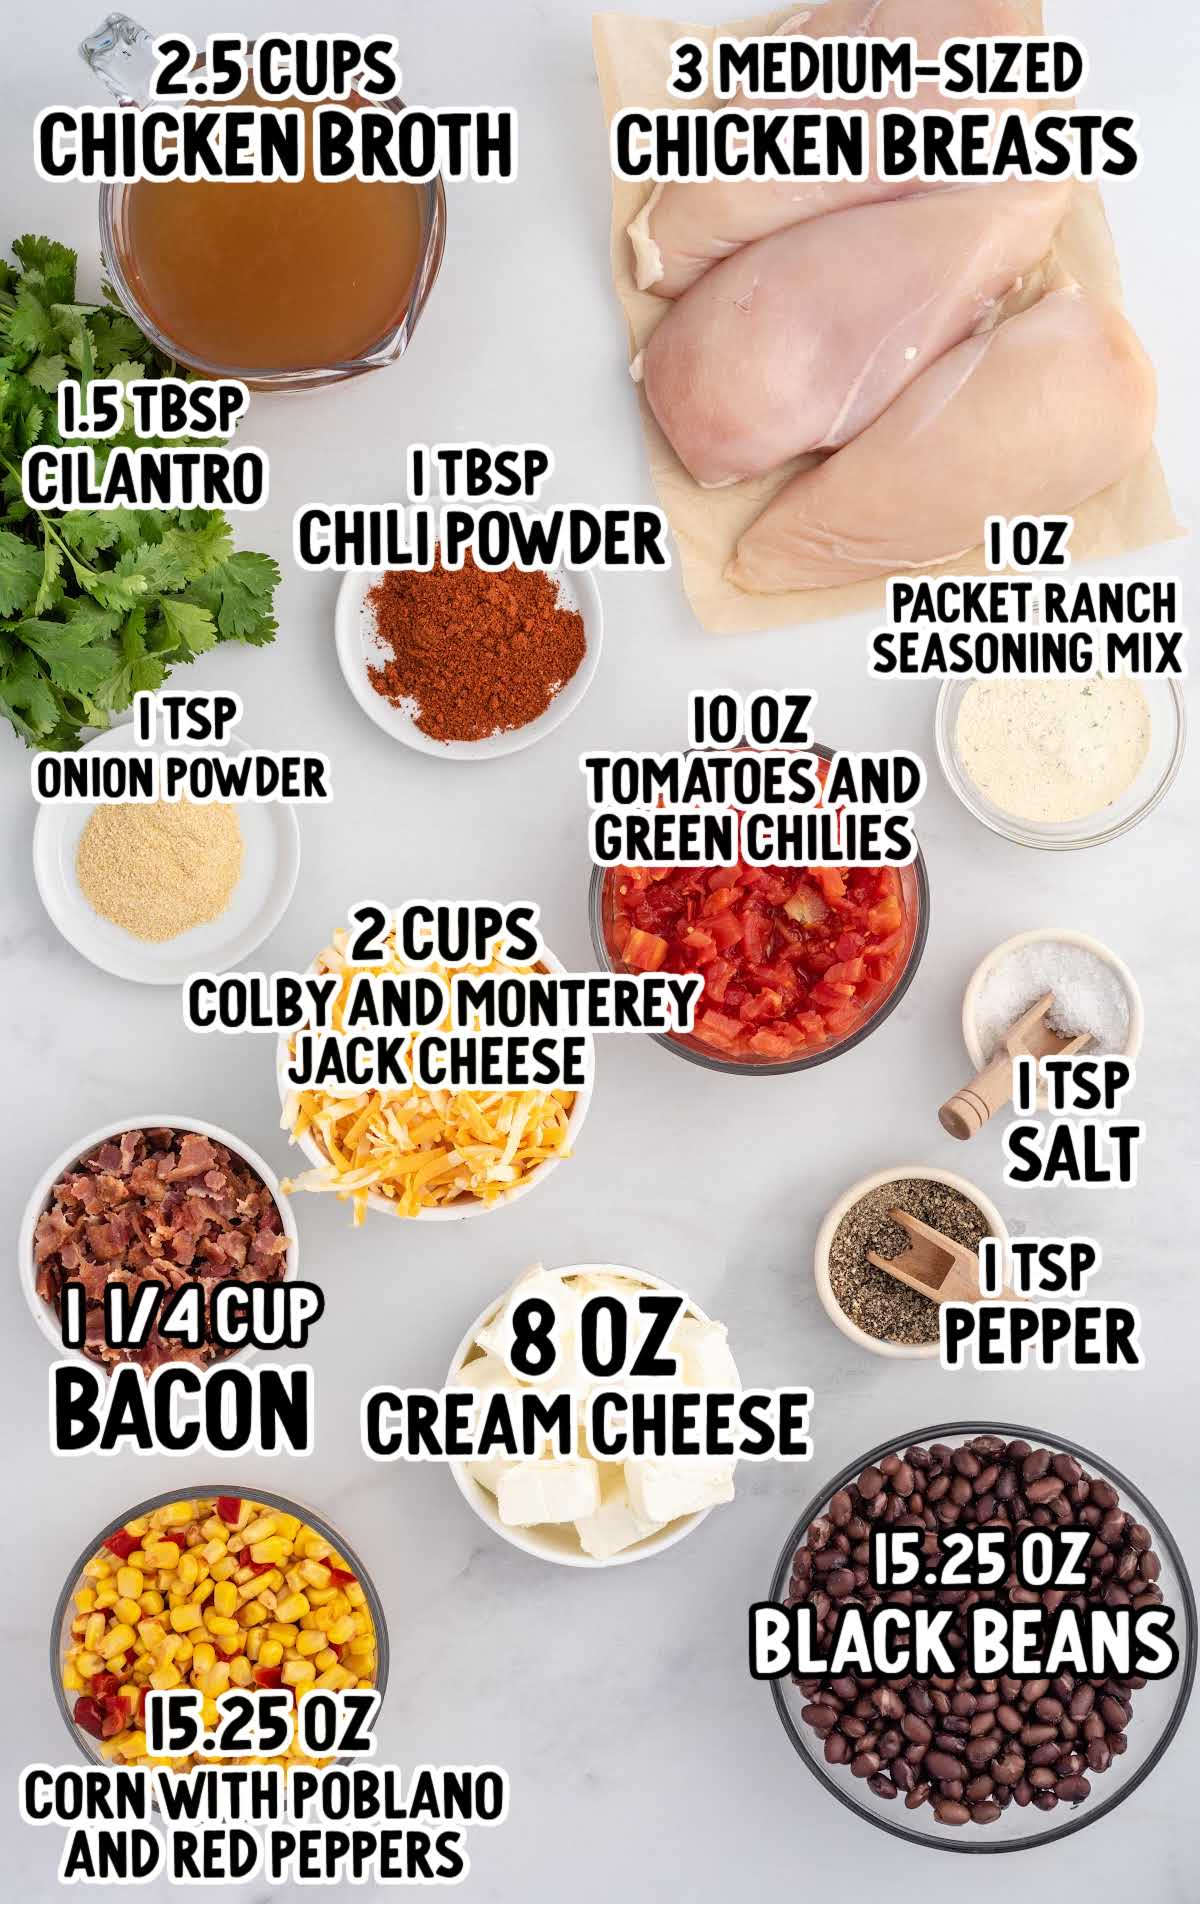 Crack Chicken Chili raw ingredients that are labeled